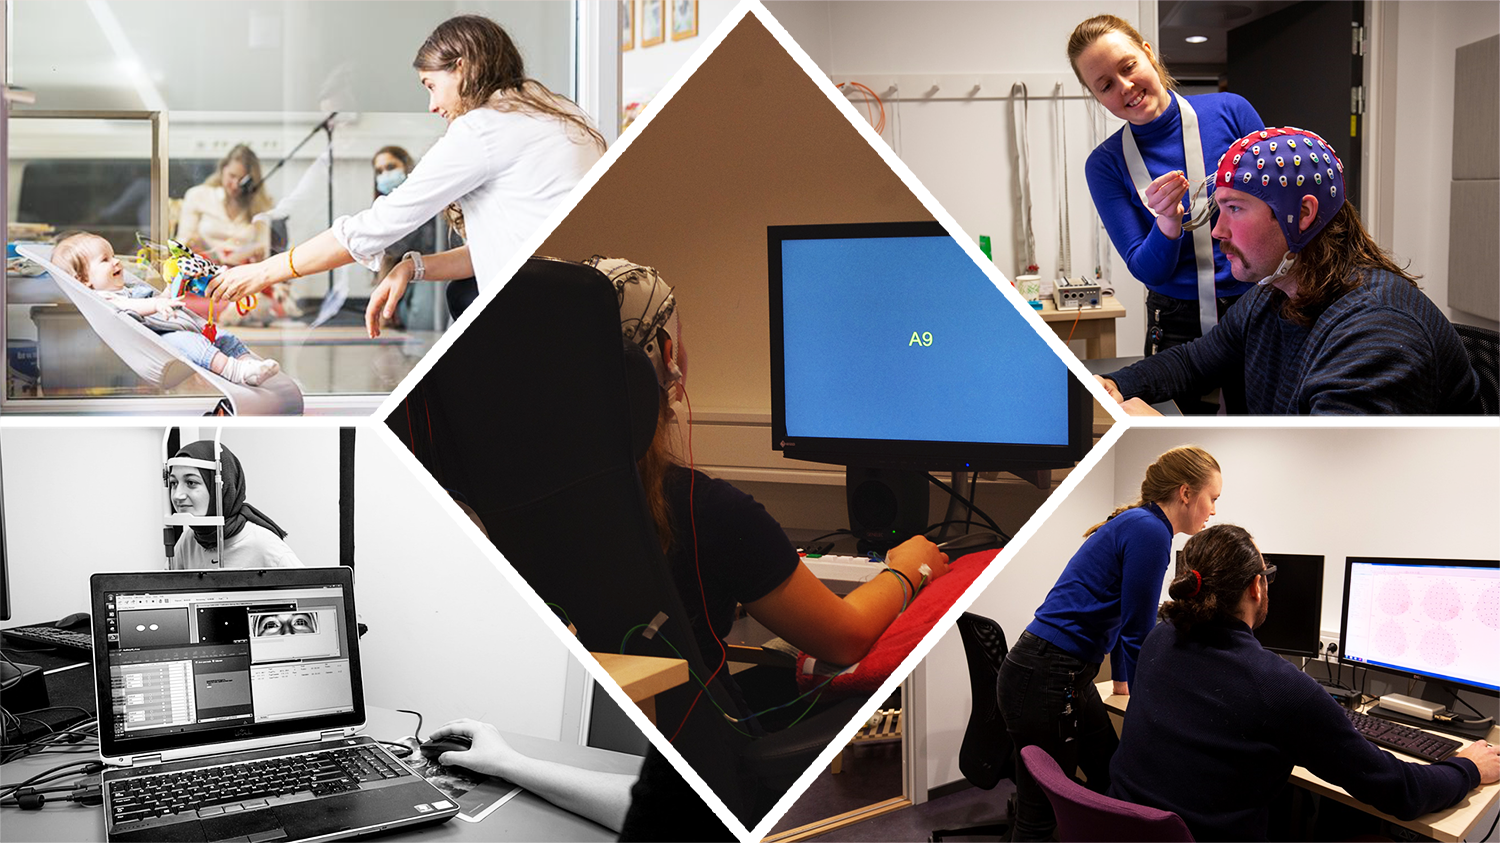 Collage of various lab and research pictures. Woman in lab coat playing with baby; Woman preparing a man for an EEG session; Woman and man monitoring signals on a computer screen; Woman with EEG cap doing a computerised task; Woman resting her head on a chin rest ready for an eyetracking session.